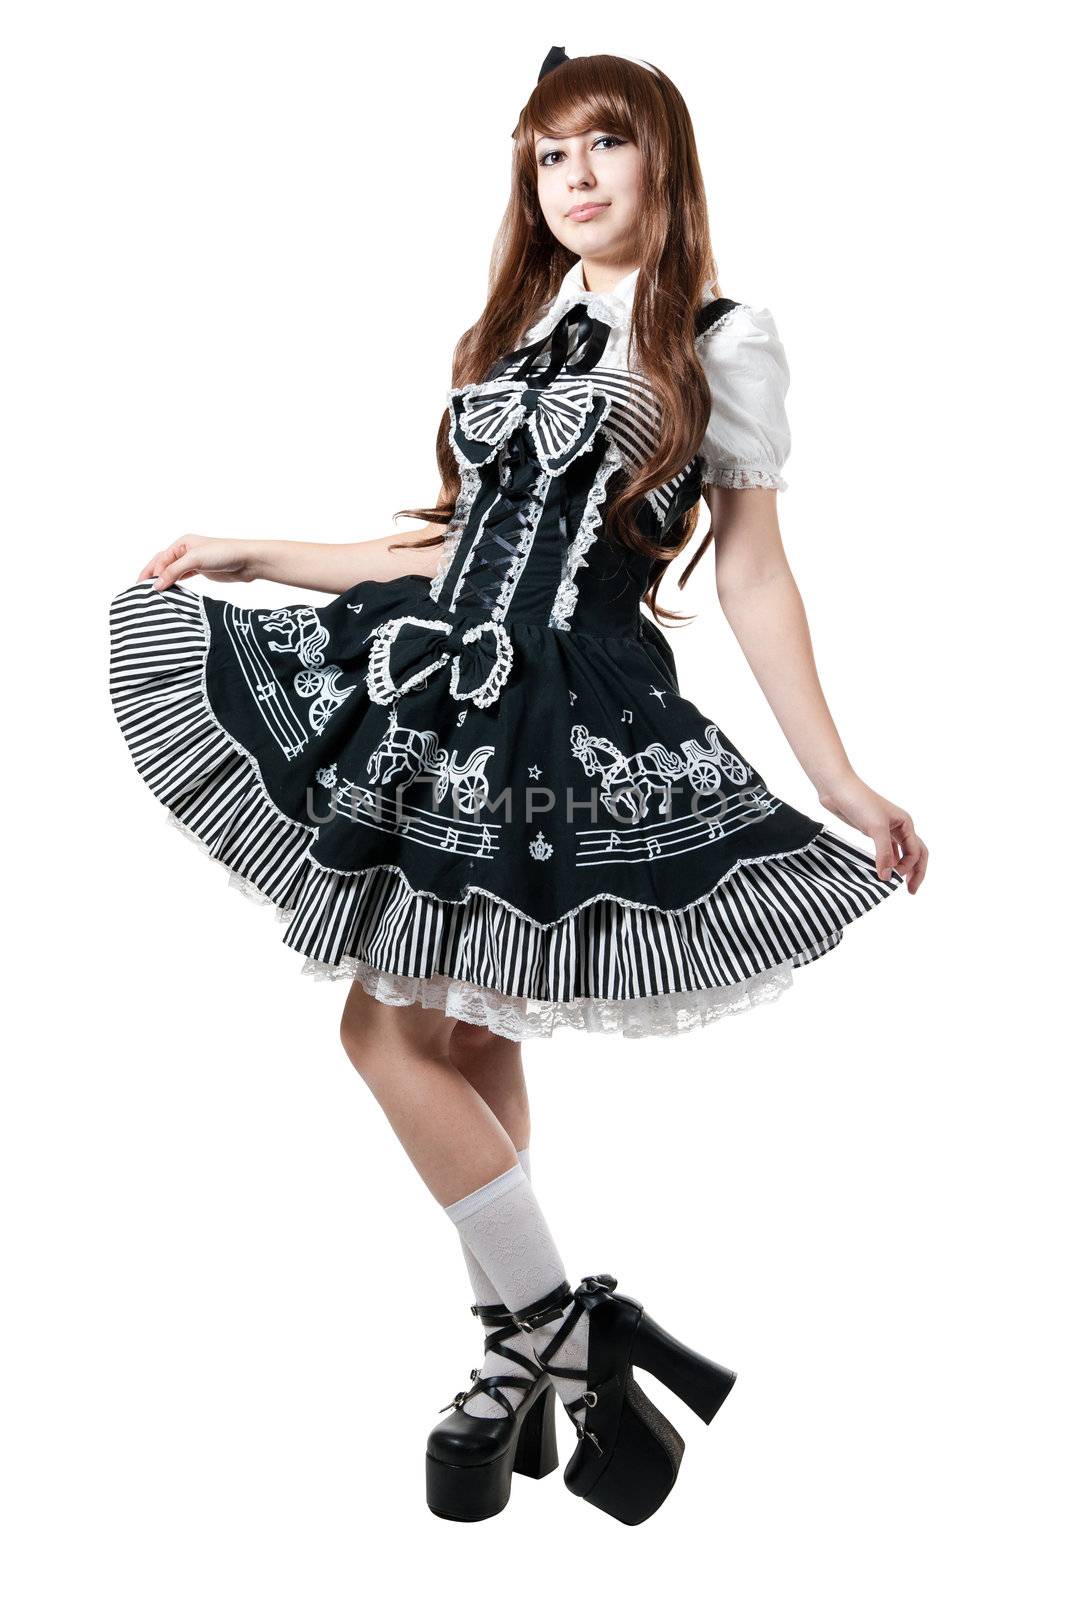 Cosplay girl in black dress isolated on white